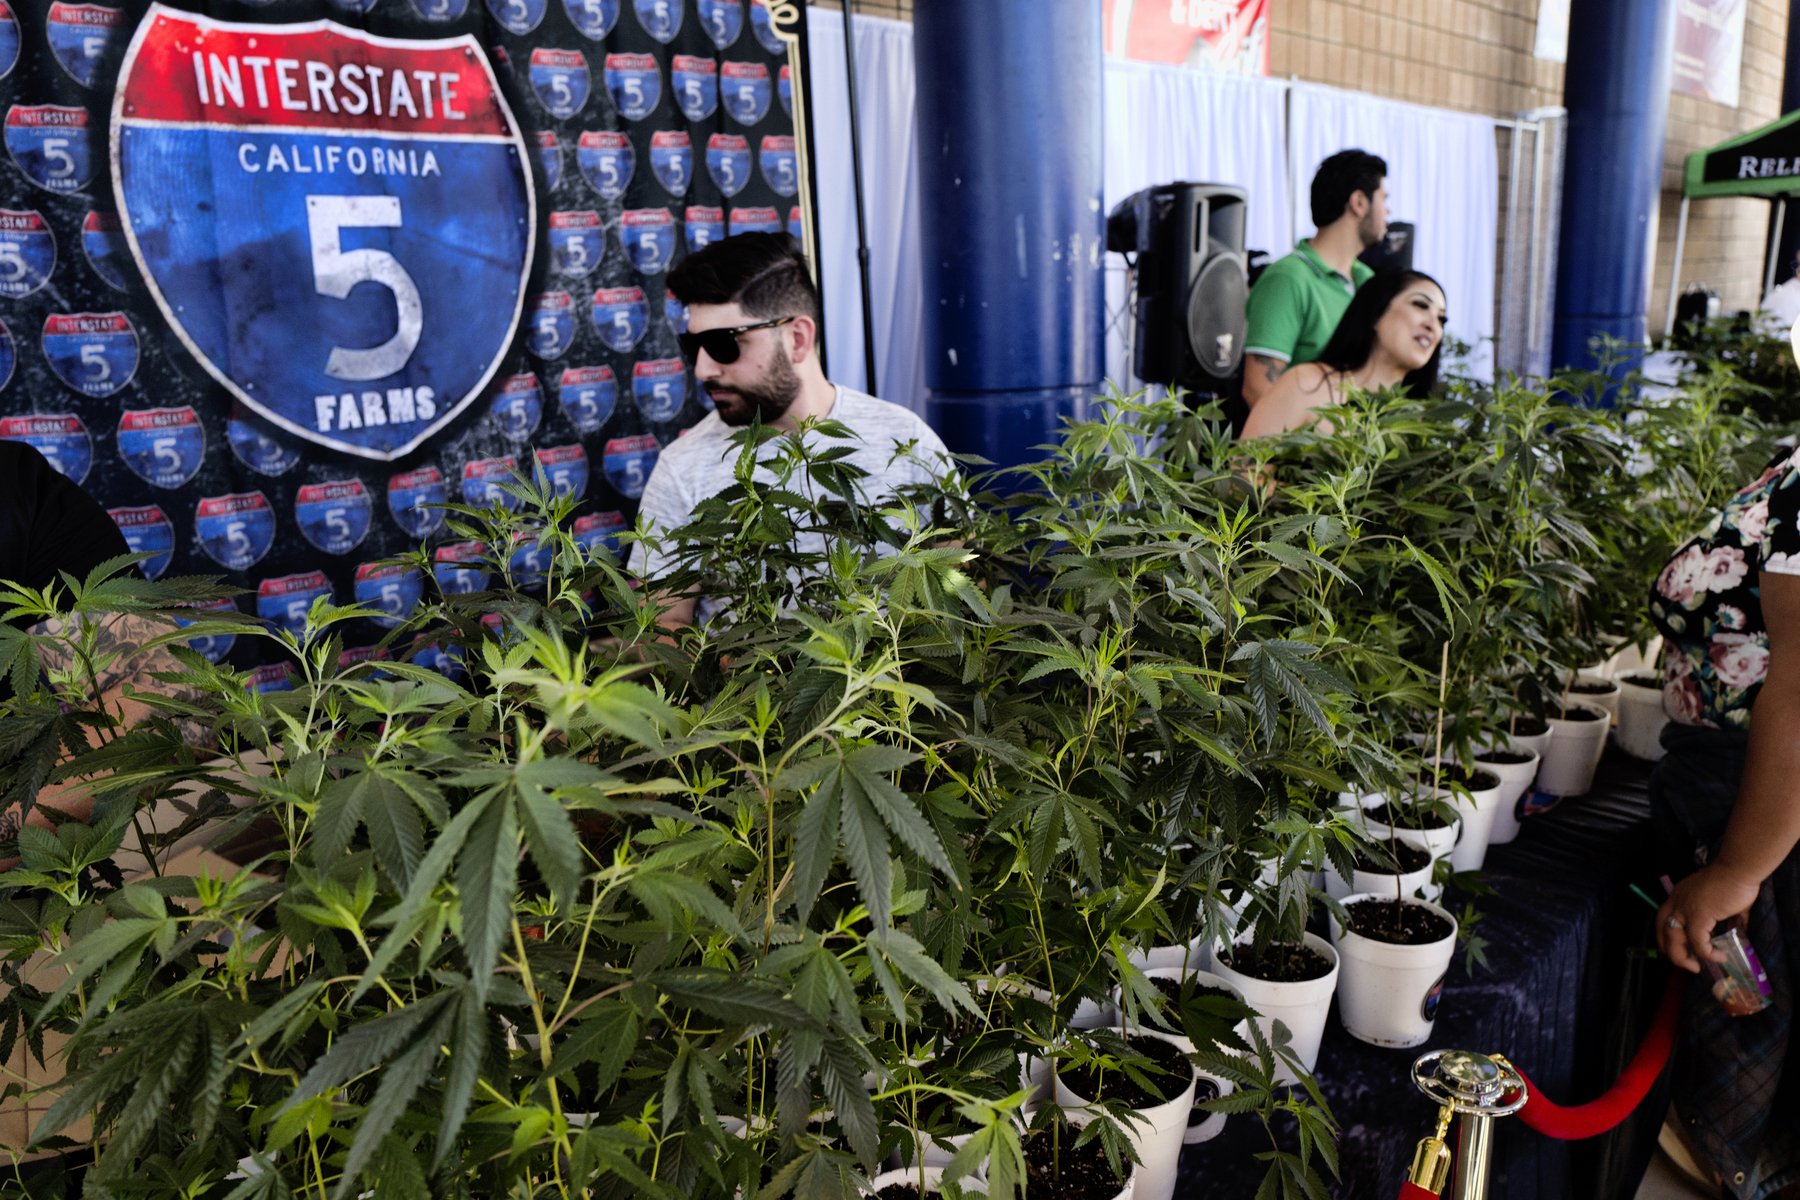 Where Is Pot Legal? - Best States - US News